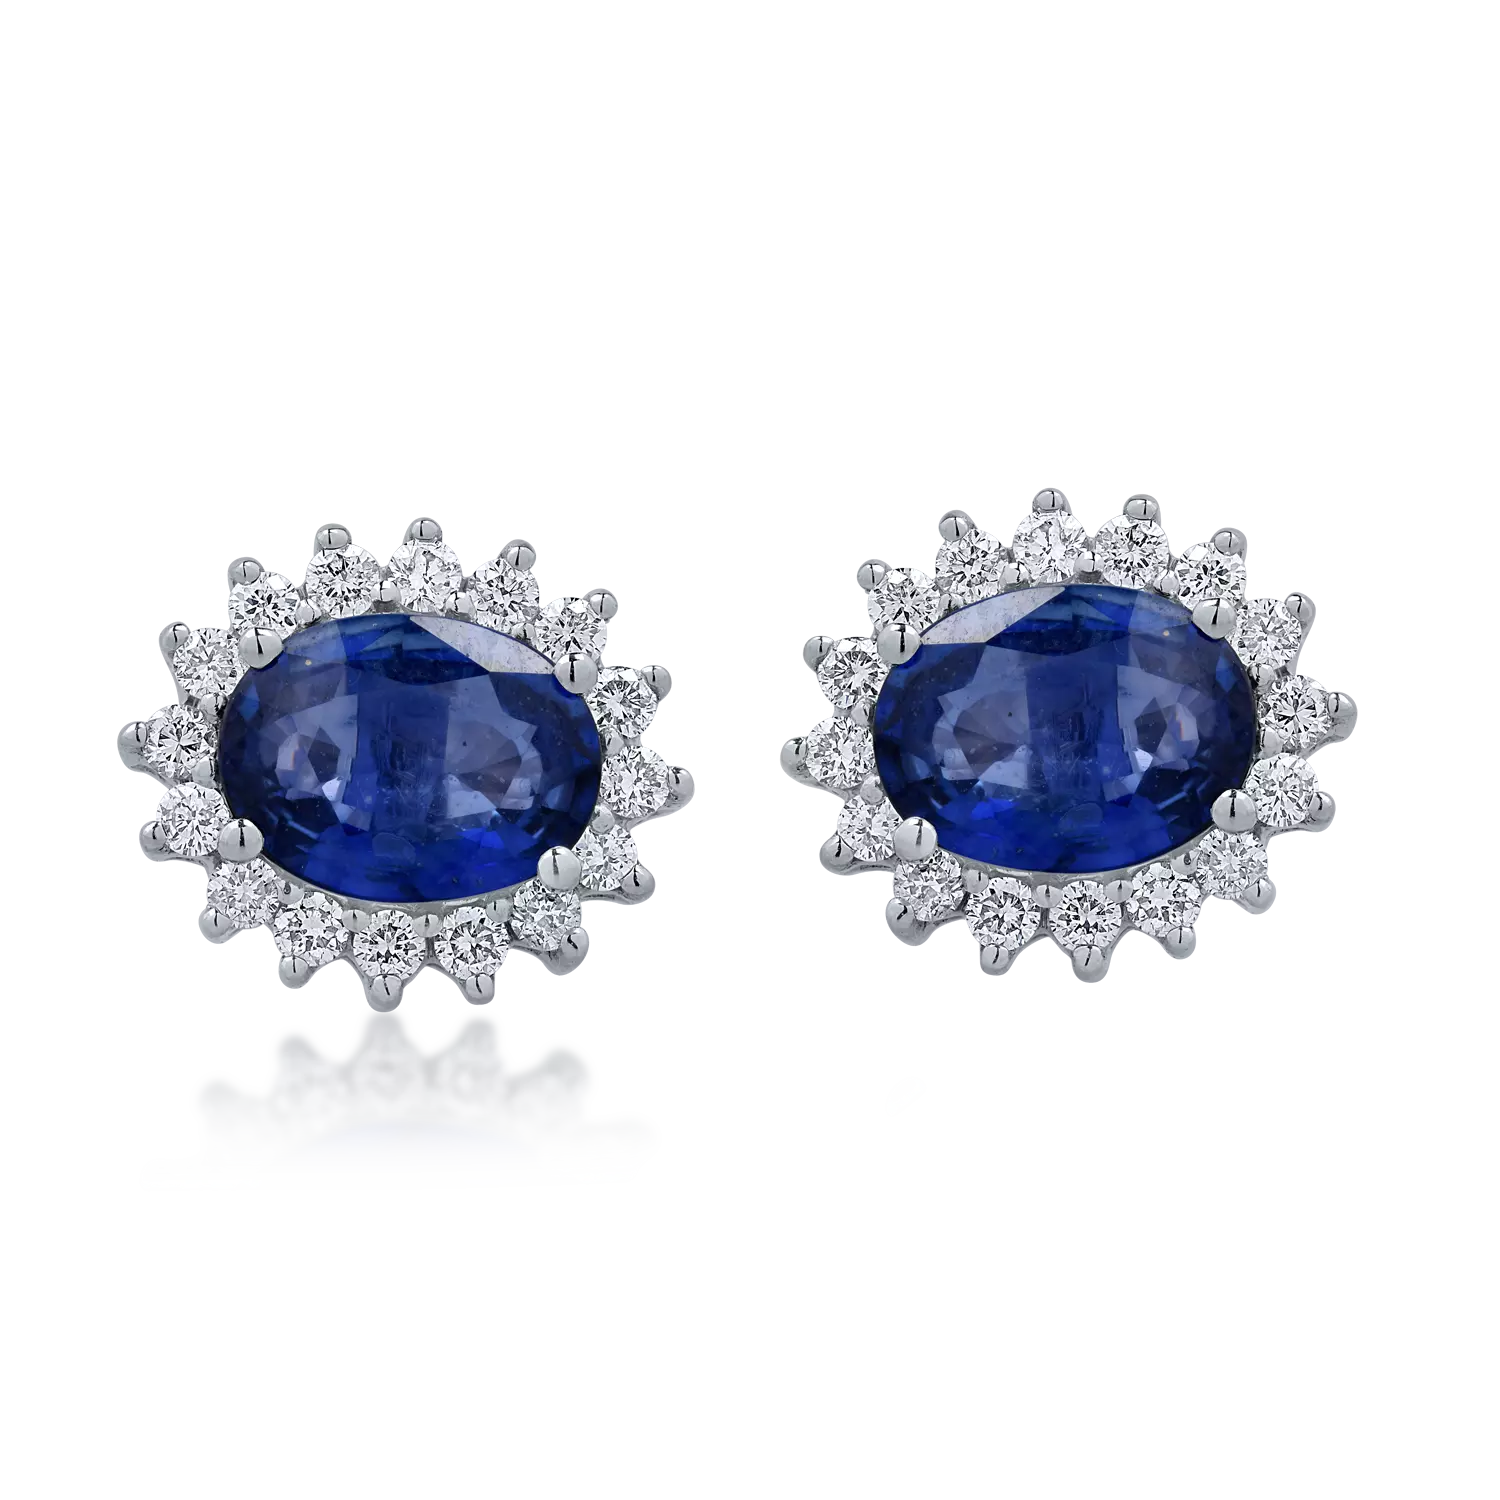 White gold earrings with 3.84ct sapphires and 0.62ct diamonds